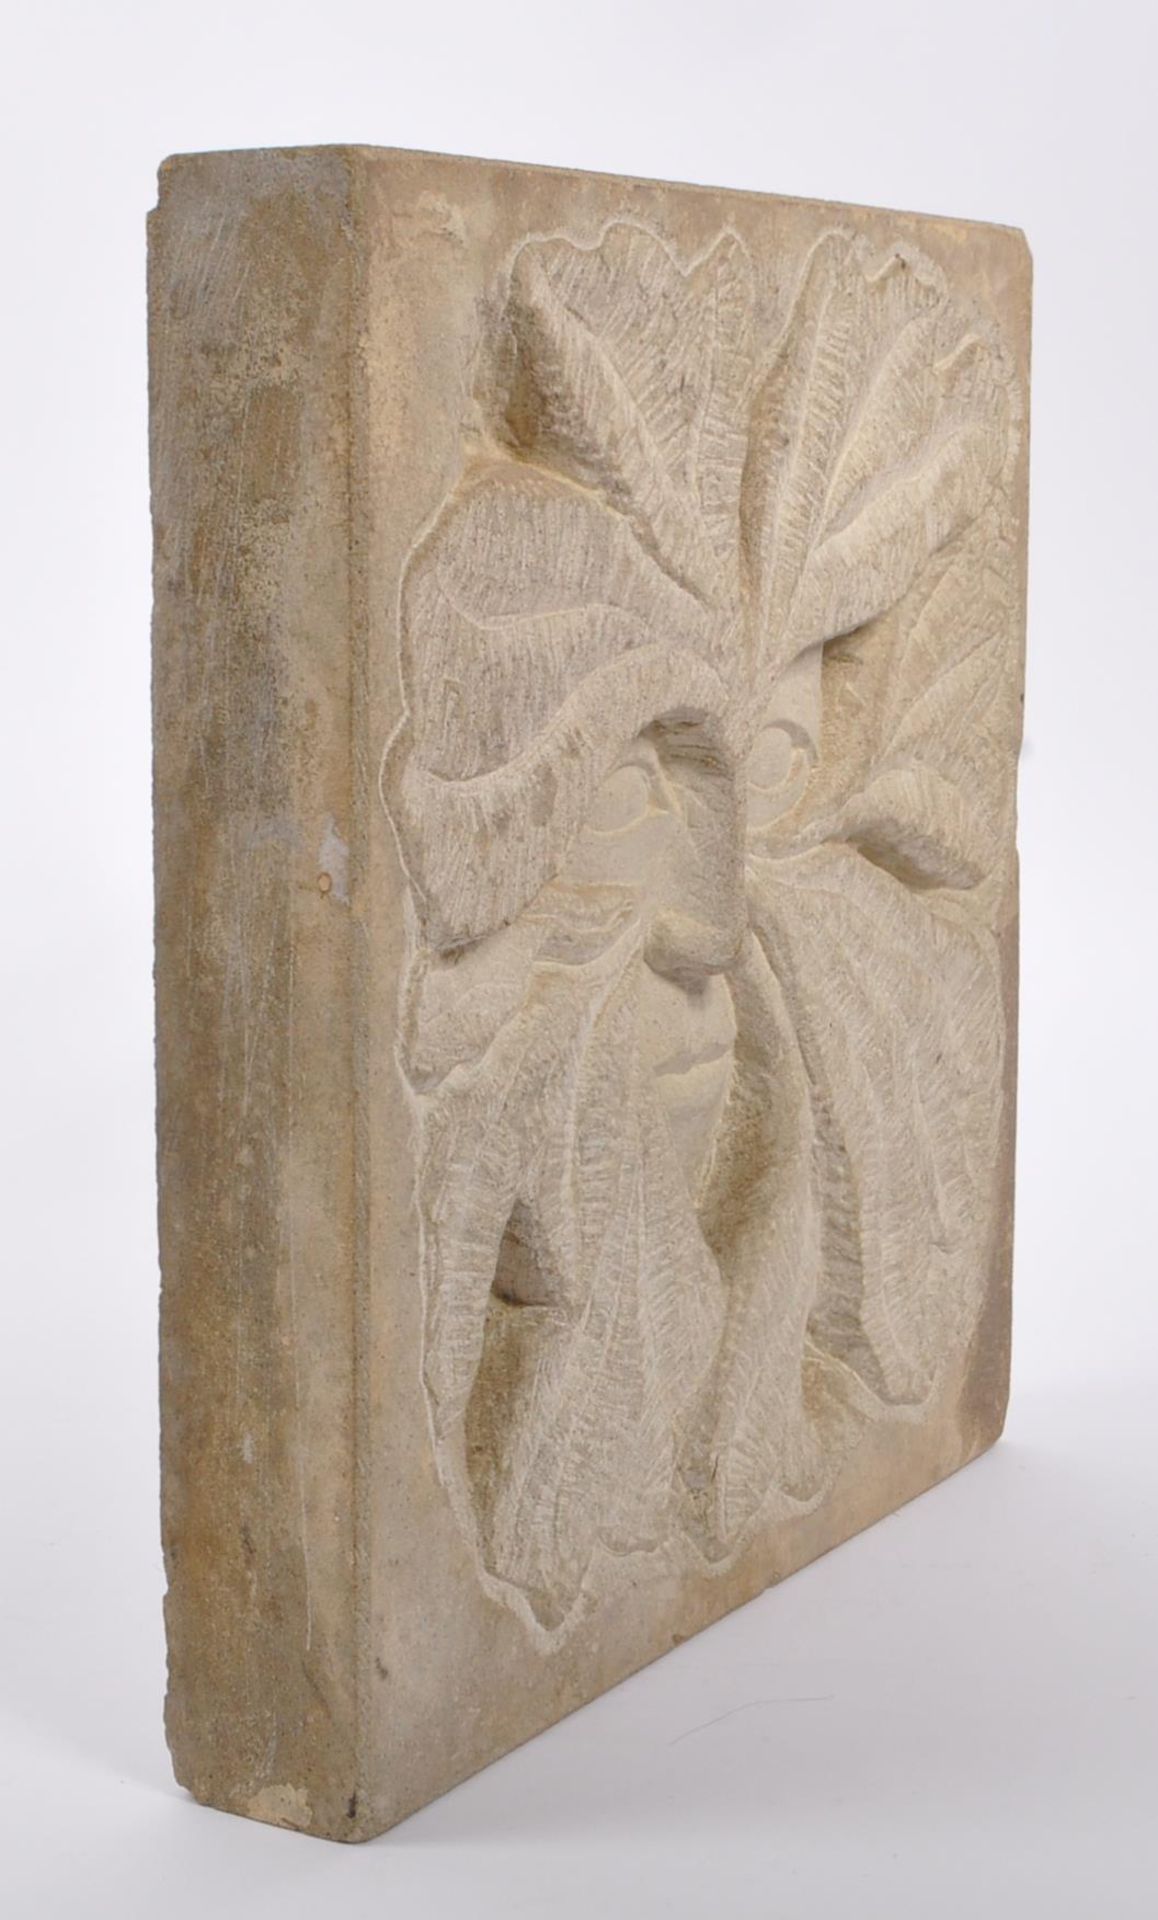 PHILIP CHATFIELD - 20TH CENTURY STONE SCULPTURE OF GREEN MAN - Image 5 of 6